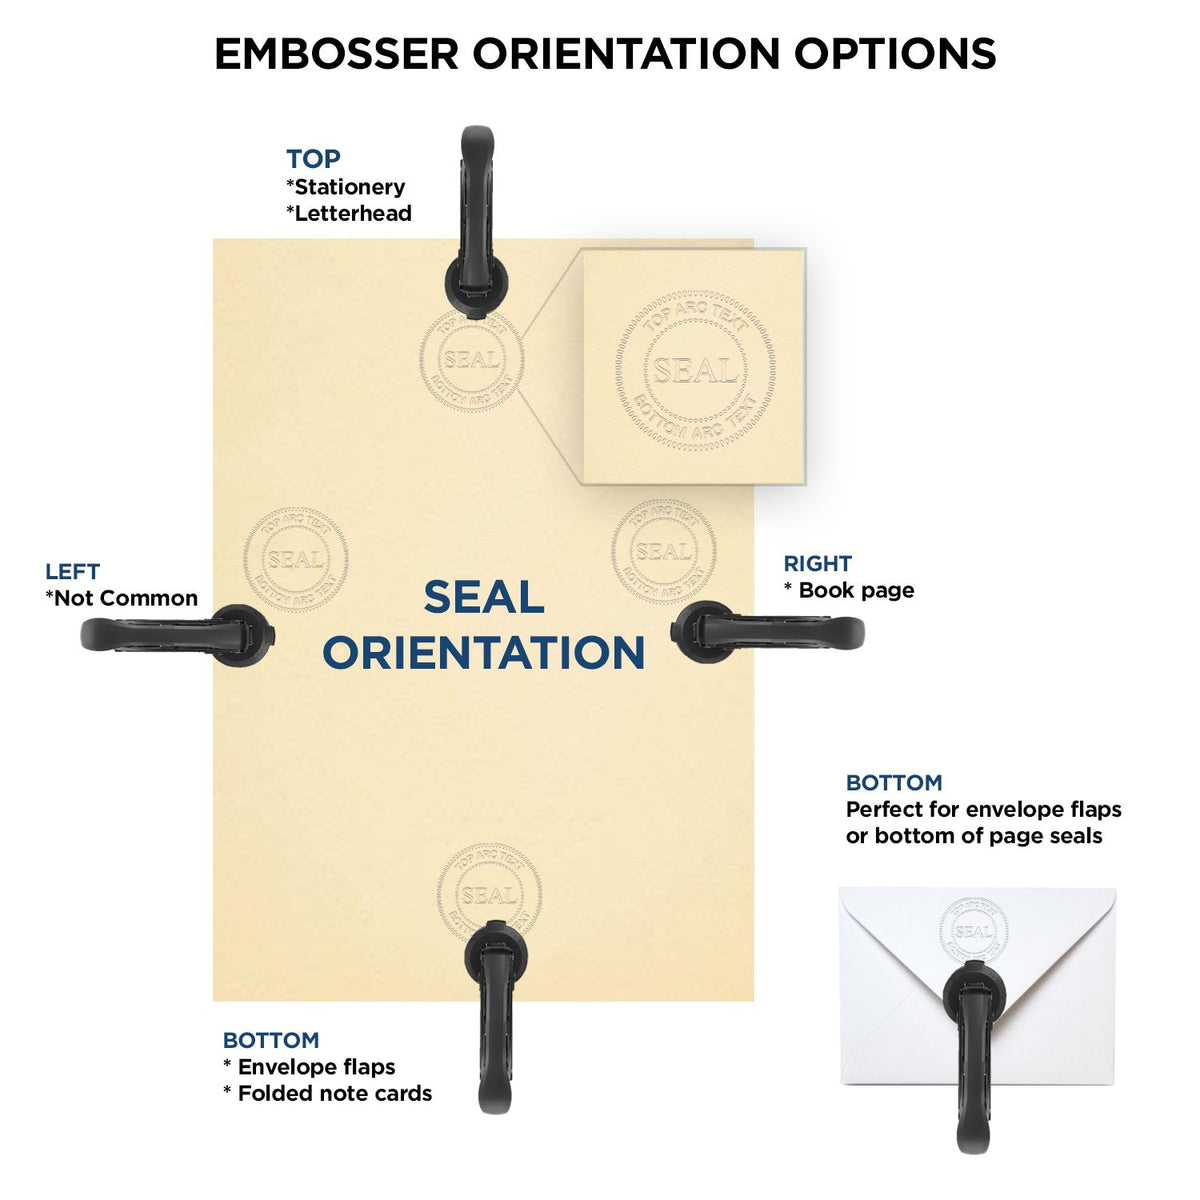 An infographic for the Heavy Duty Cast Iron Guam Land Surveyor Seal Embosser showing embosser orientation, this is showing examples of a top, bottom, right and left insert.